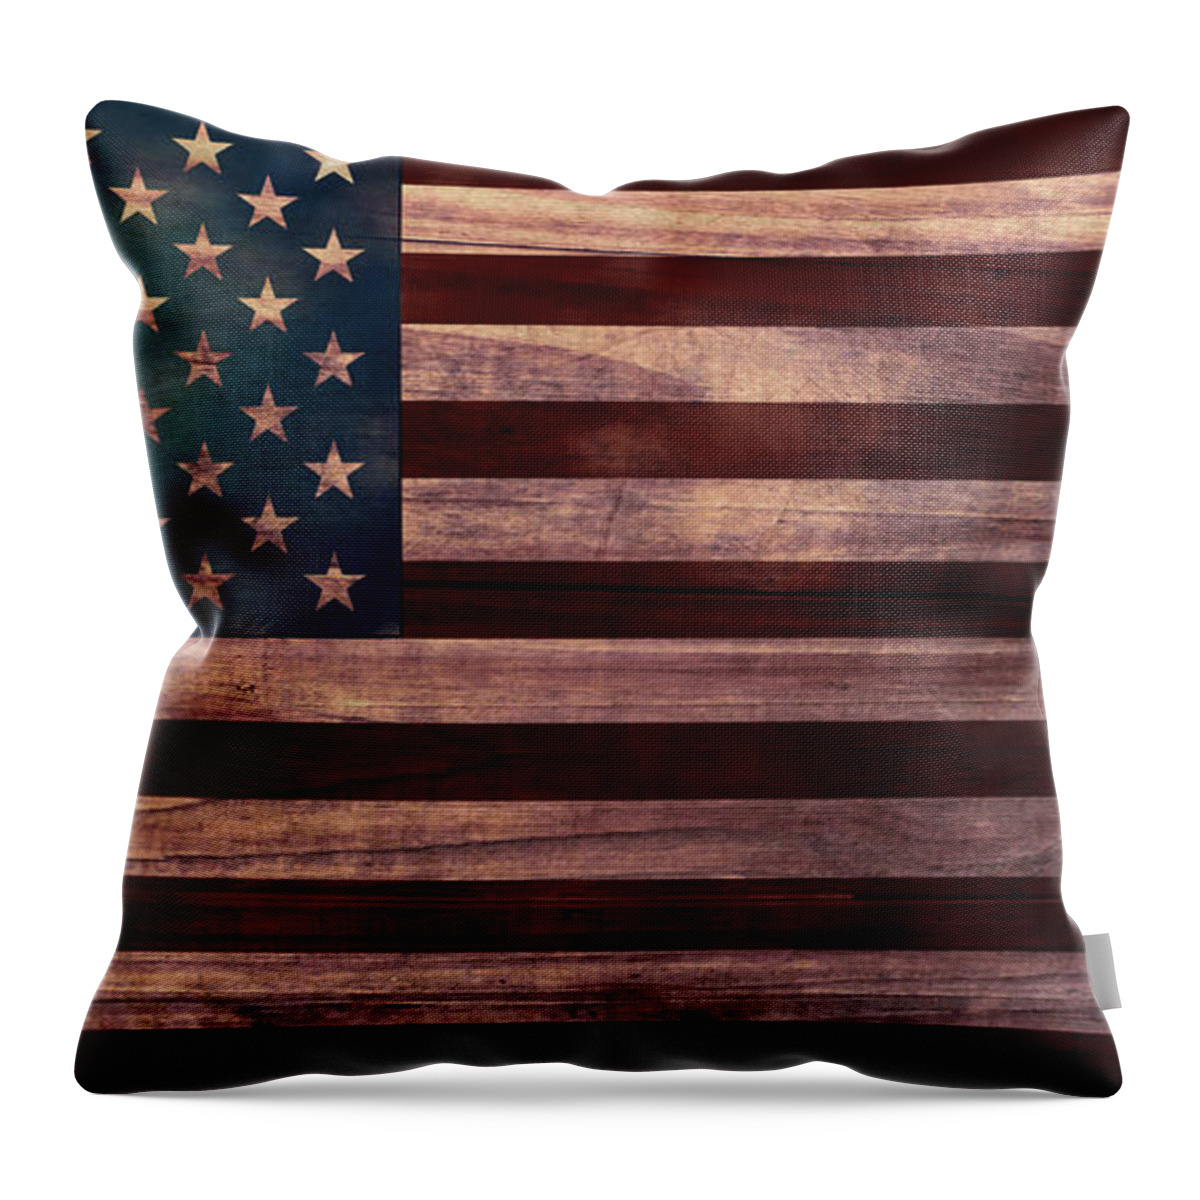 American Flag Throw Pillow featuring the digital art American Flag I by April Moen